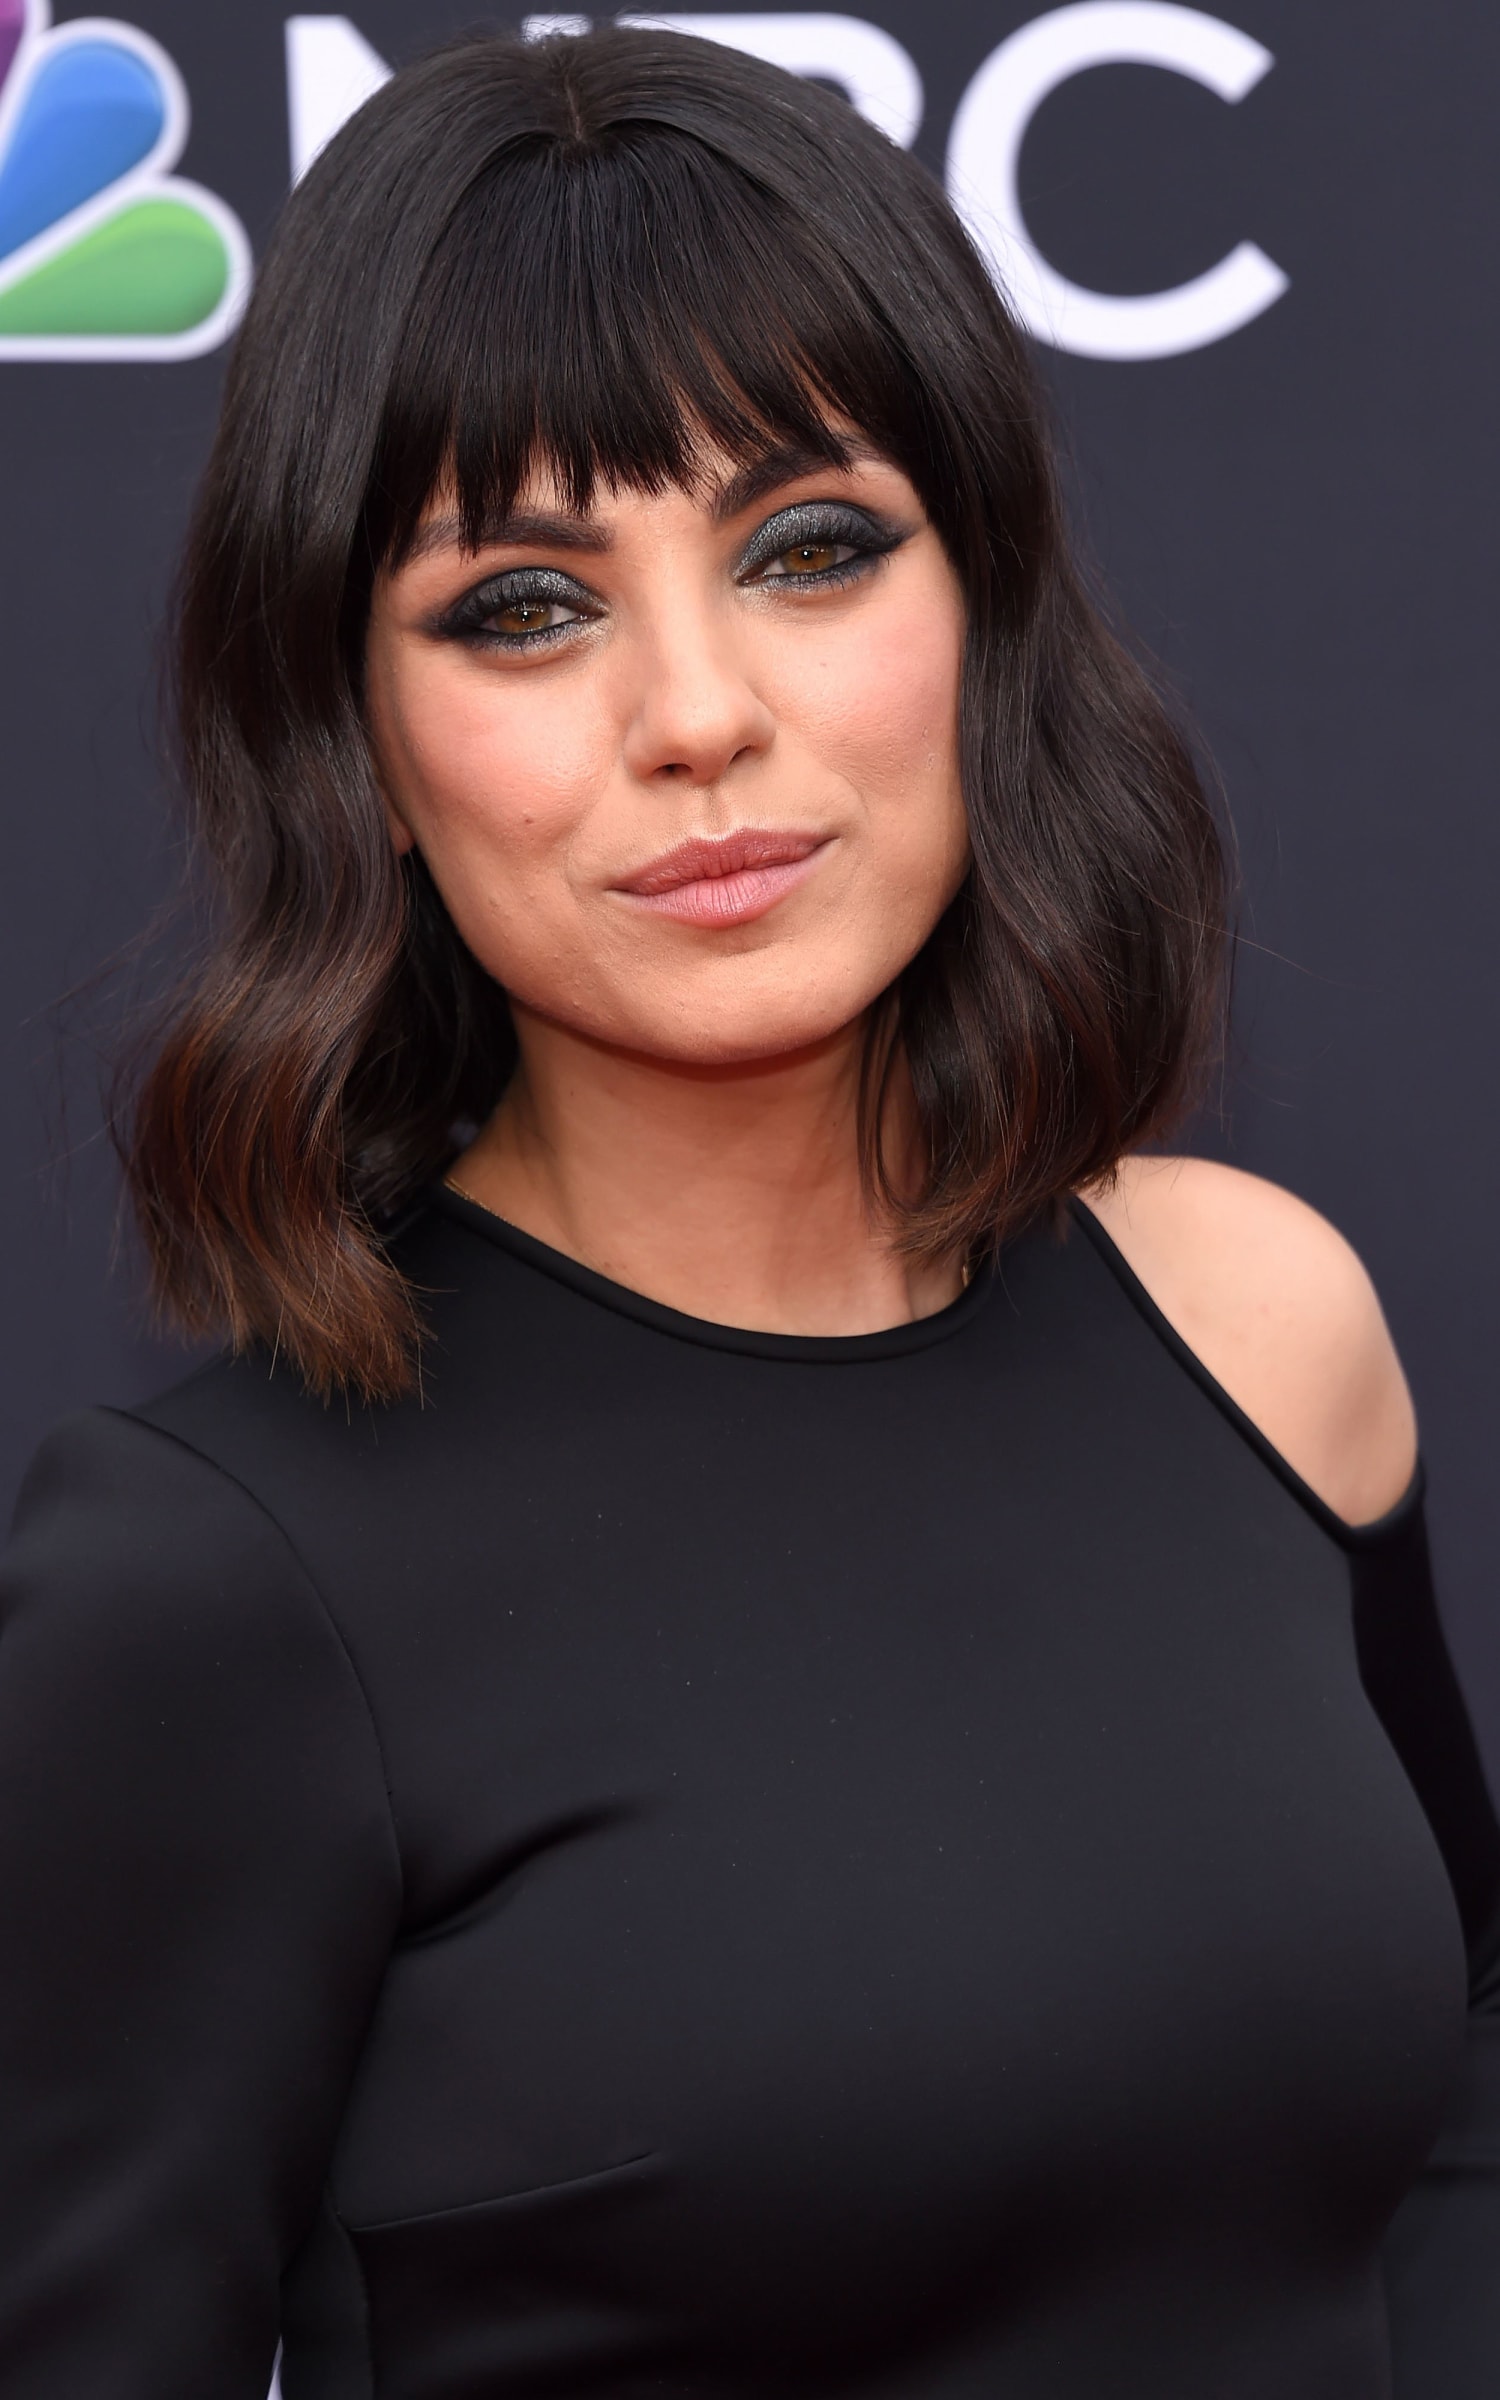 Mila Kunis unveiled a blunt bob and bangs at the Billboard Music Awards